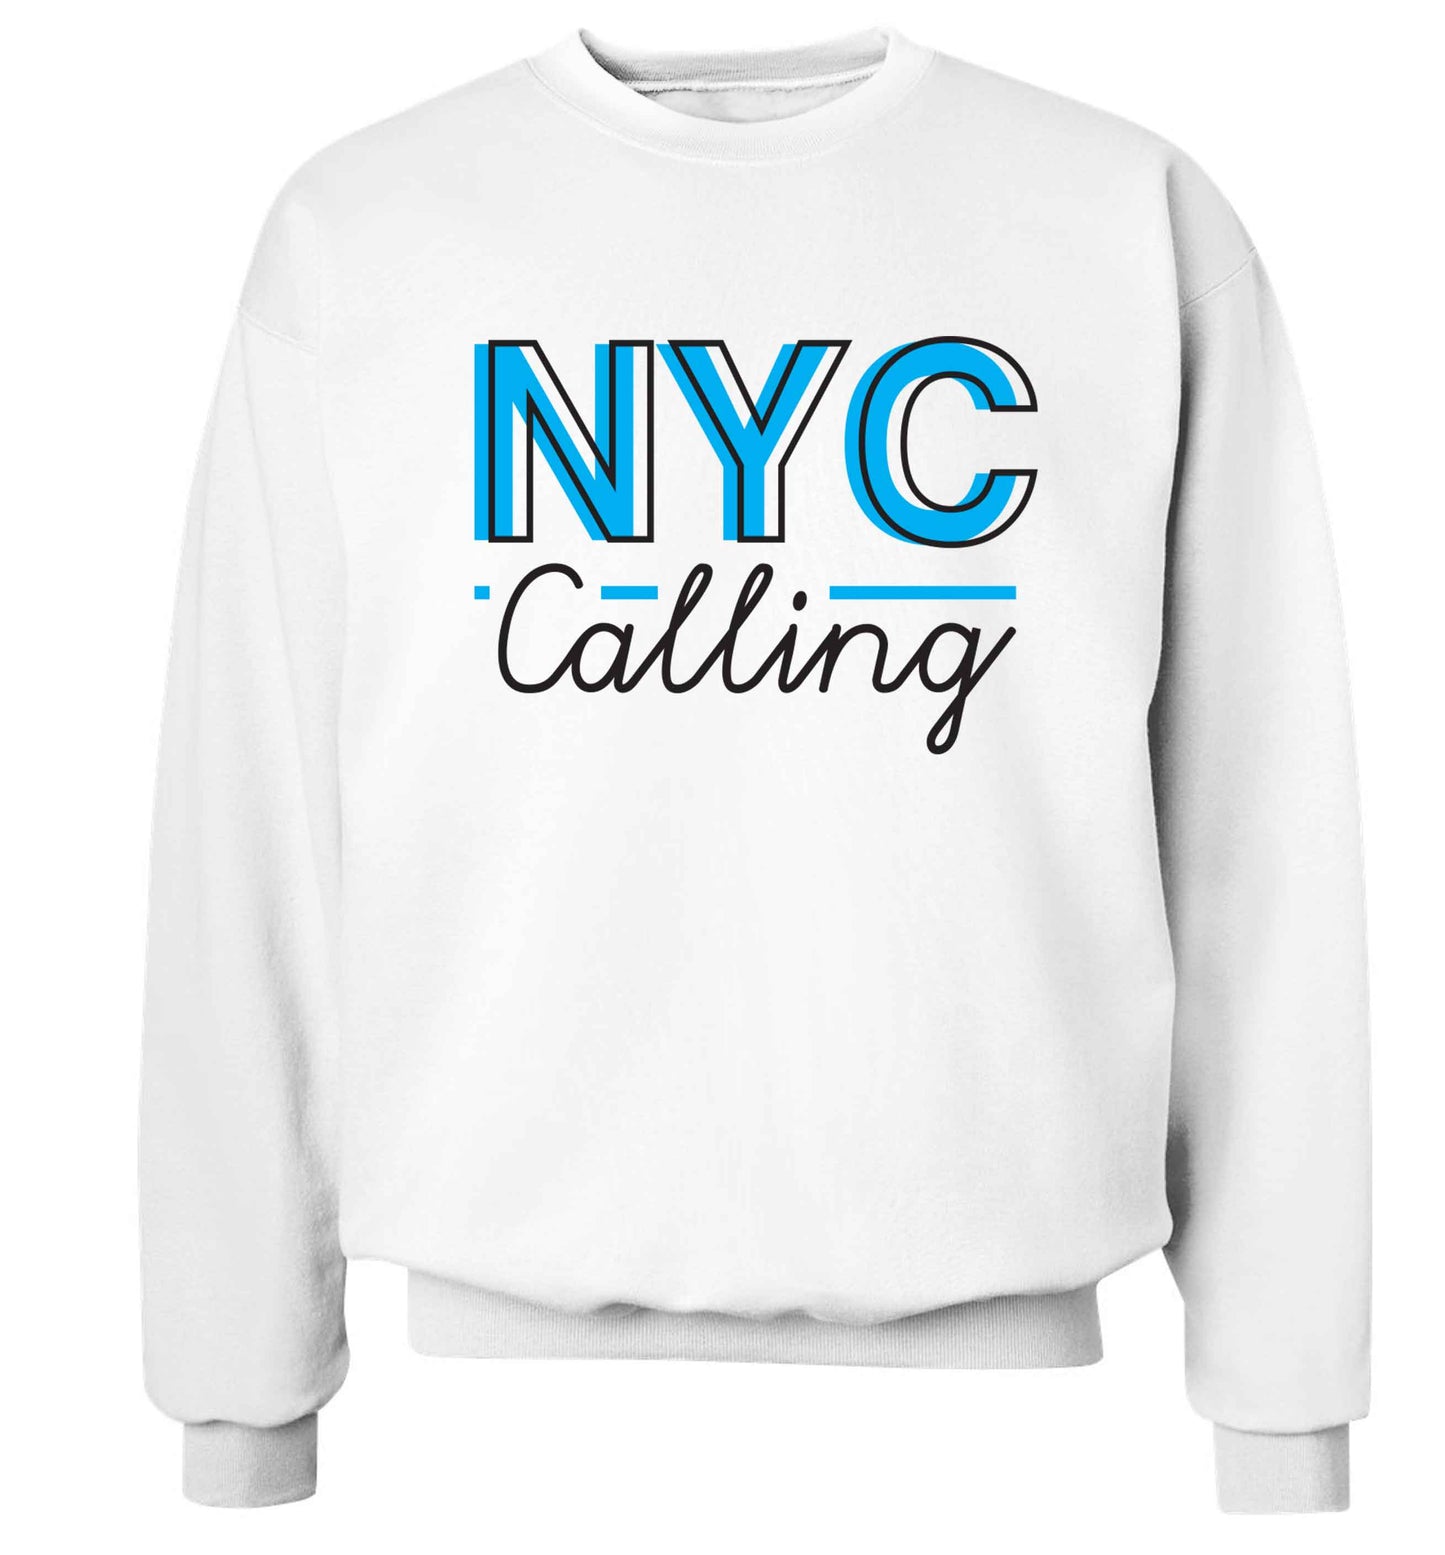 NYC calling Adult's unisex white Sweater 2XL